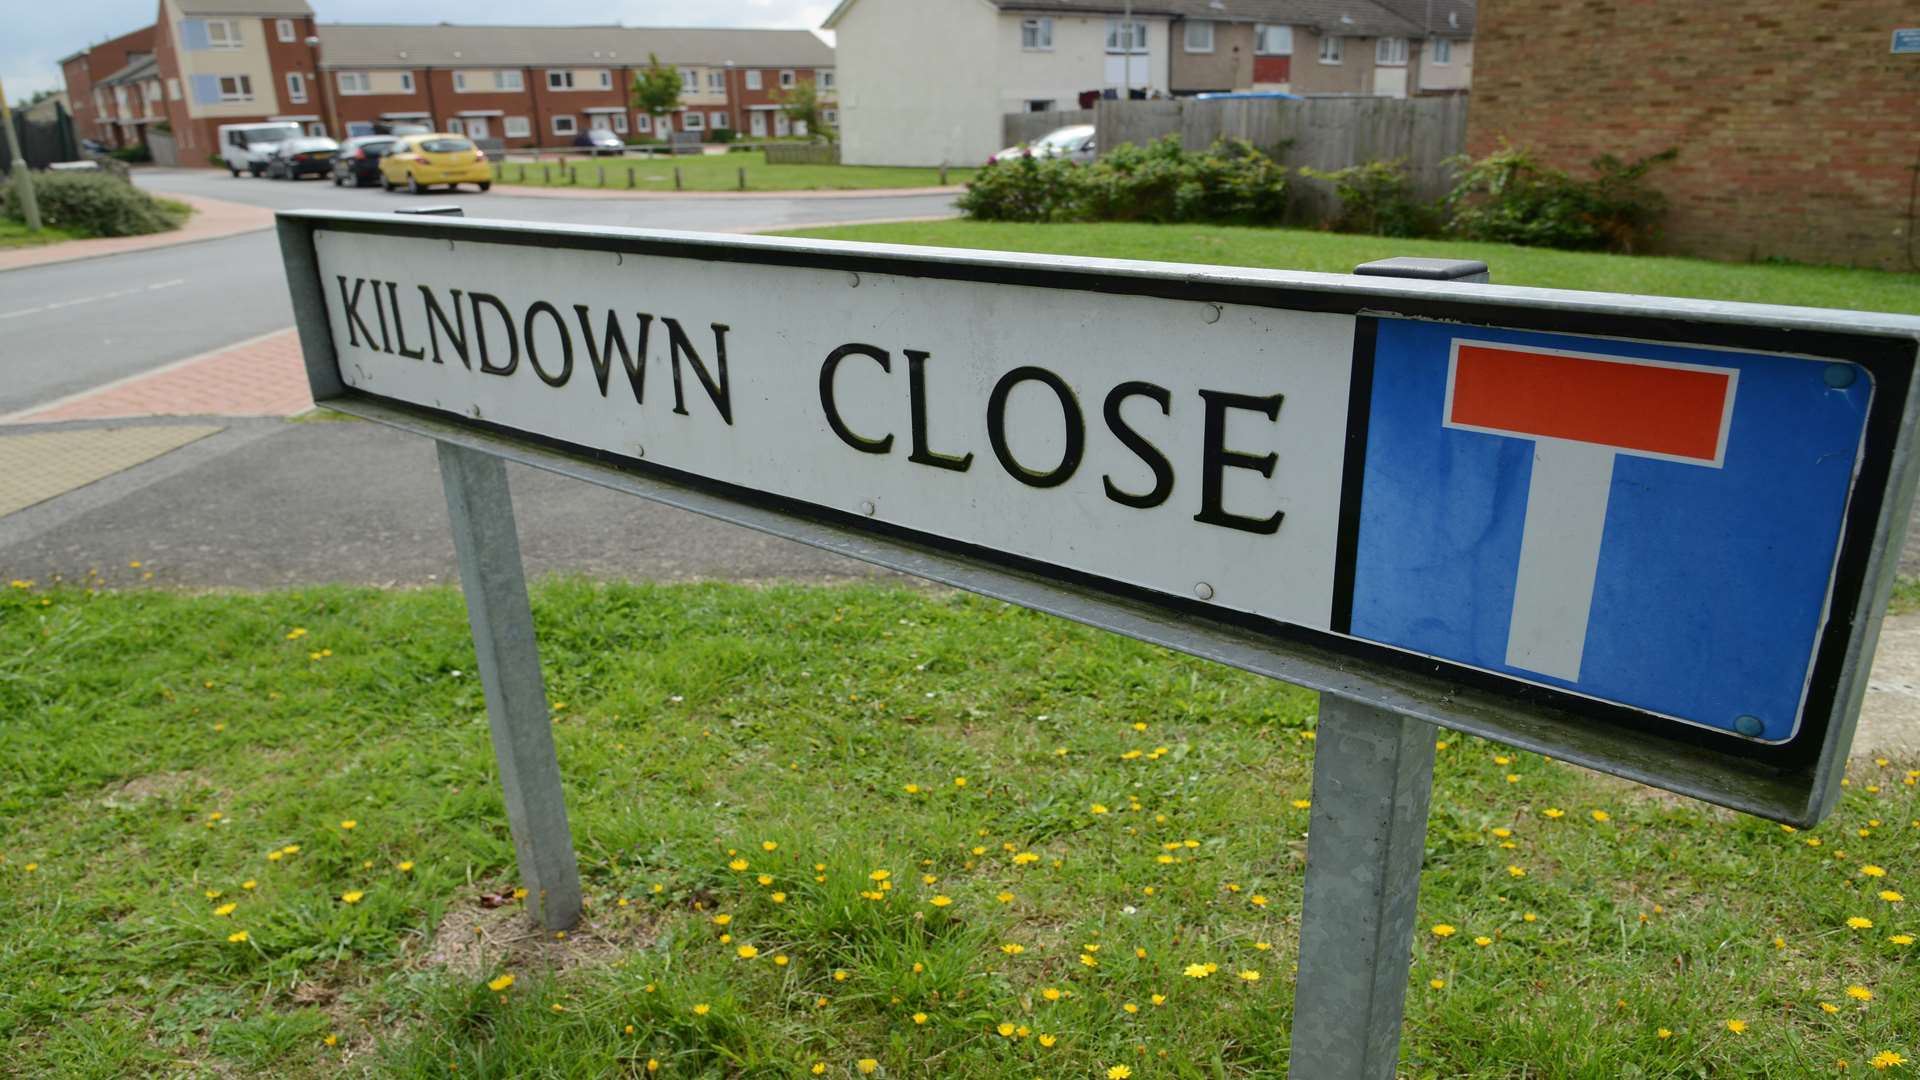 Bedford chased the two bailiffs into the street near his home in Kilndown Close, Stanhope